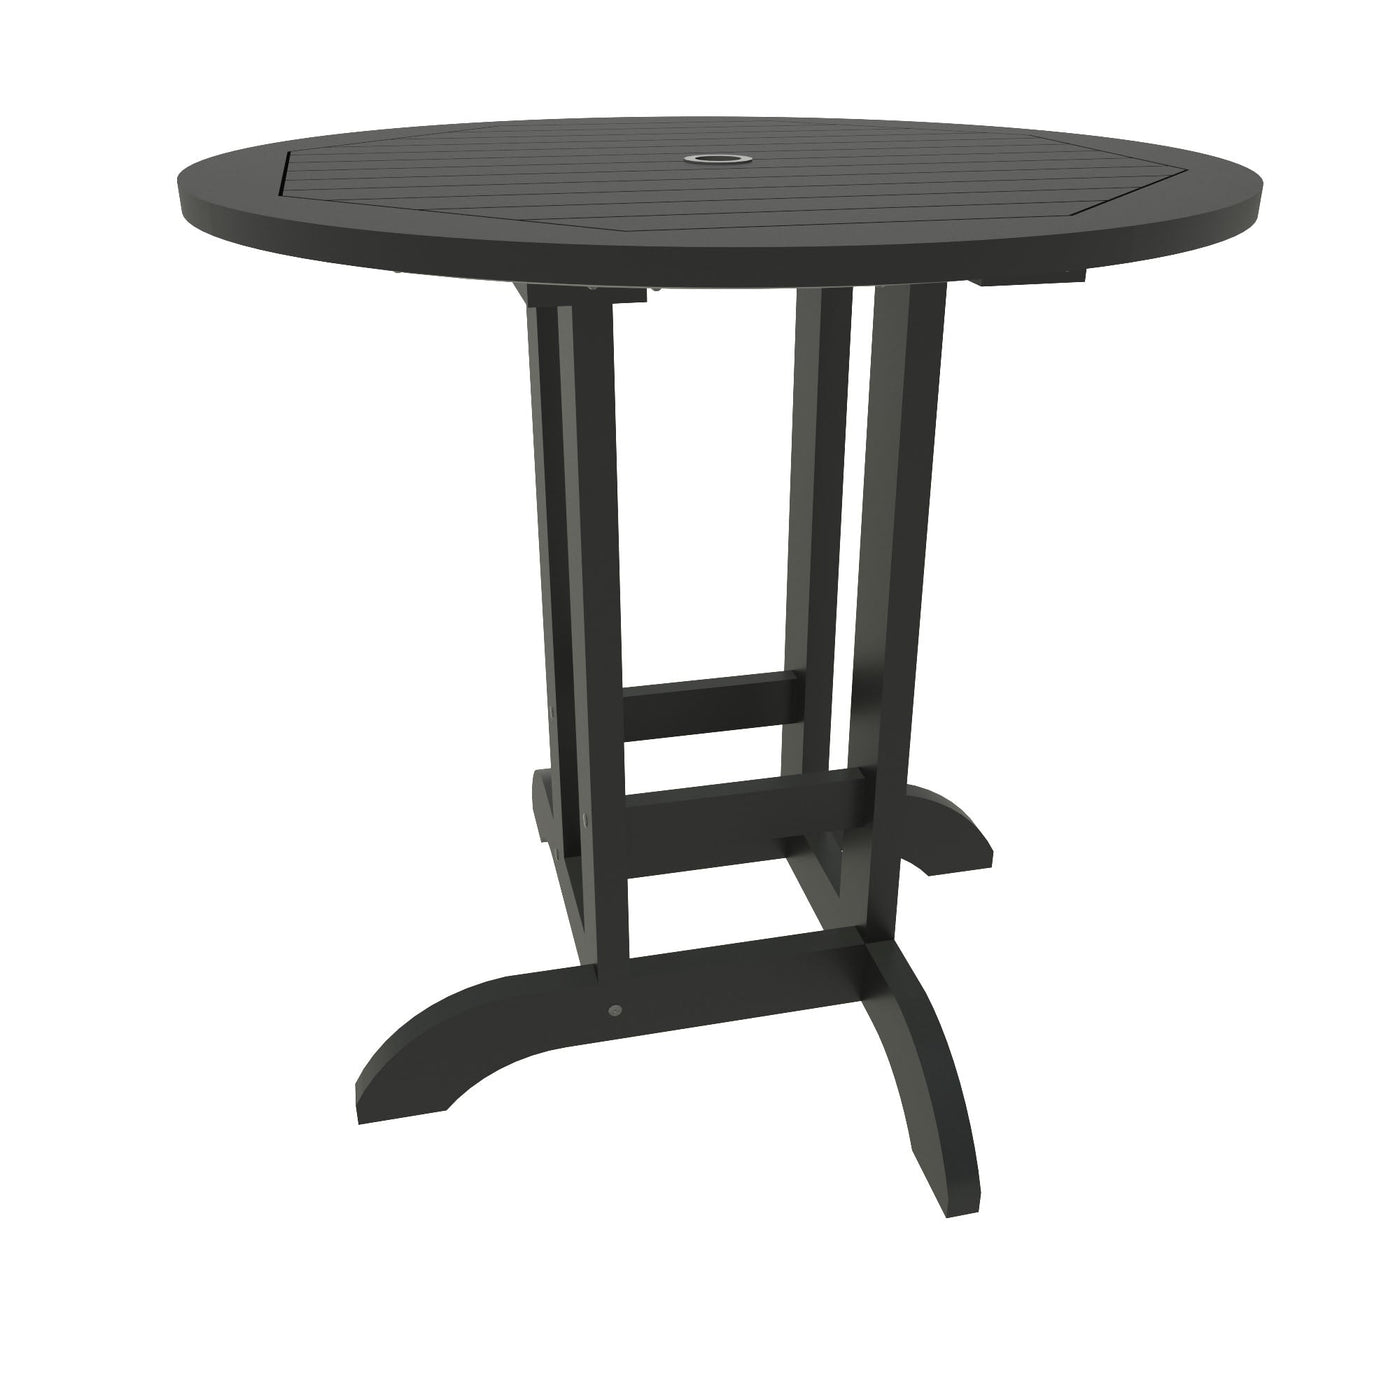 Round 36in Diameter Dining Table - Counter Height Dining Highwood USA Black 